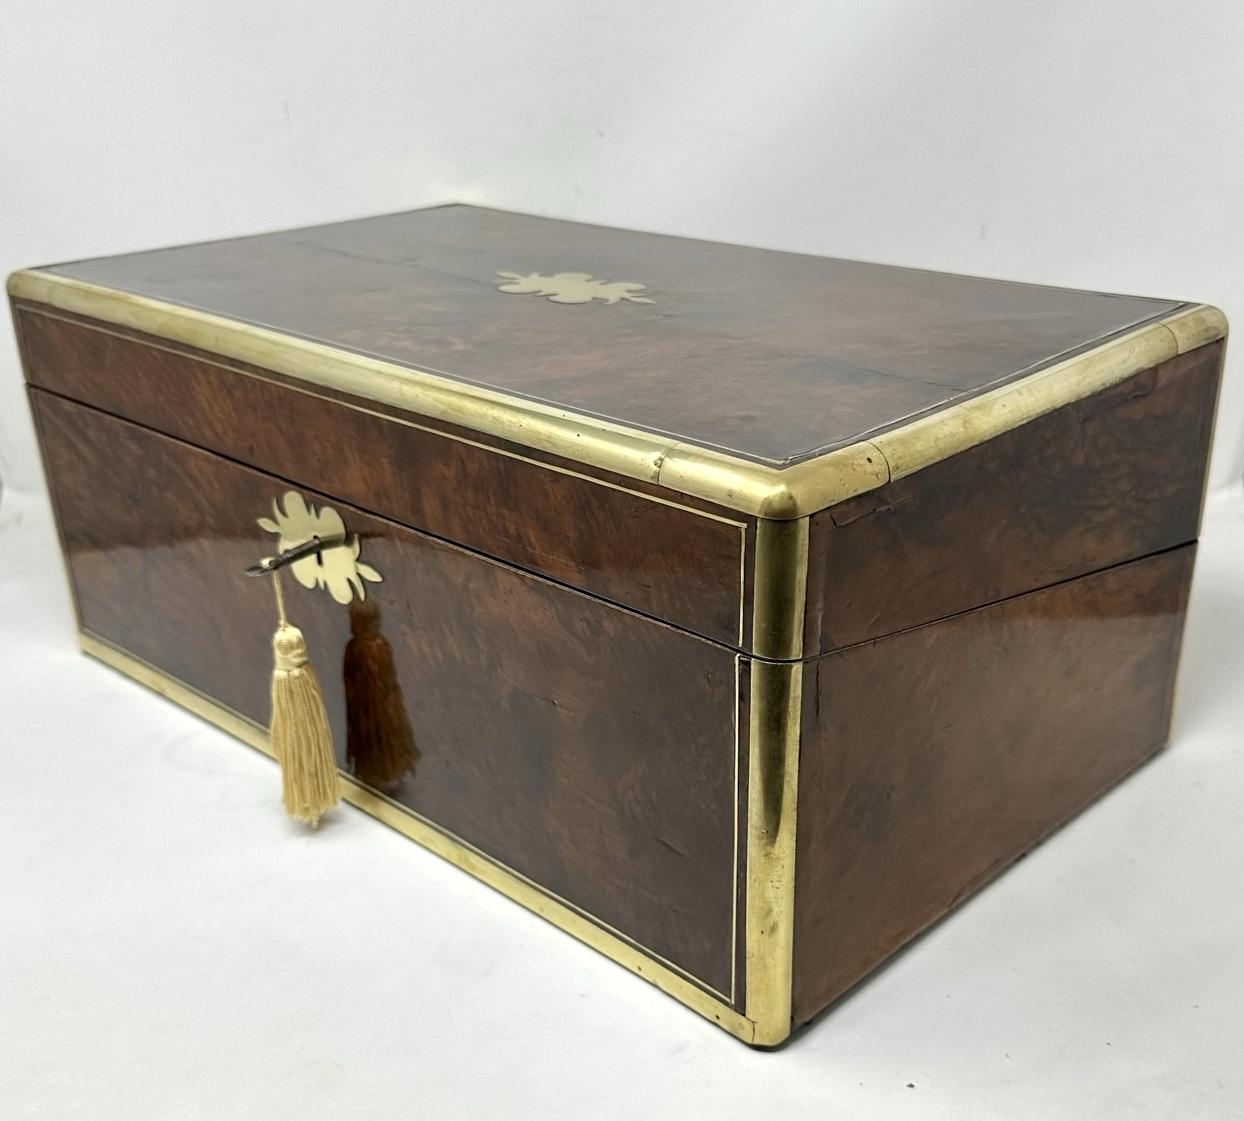 An Exceptionally fine Quality English Well Figured Solid Burr Walnut Ladies or Gents Travelling Writing Slope of outstanding quality and quite large proportions. Third quarter of the Nineteenth Century. 

The hinged lid opening to reveal an